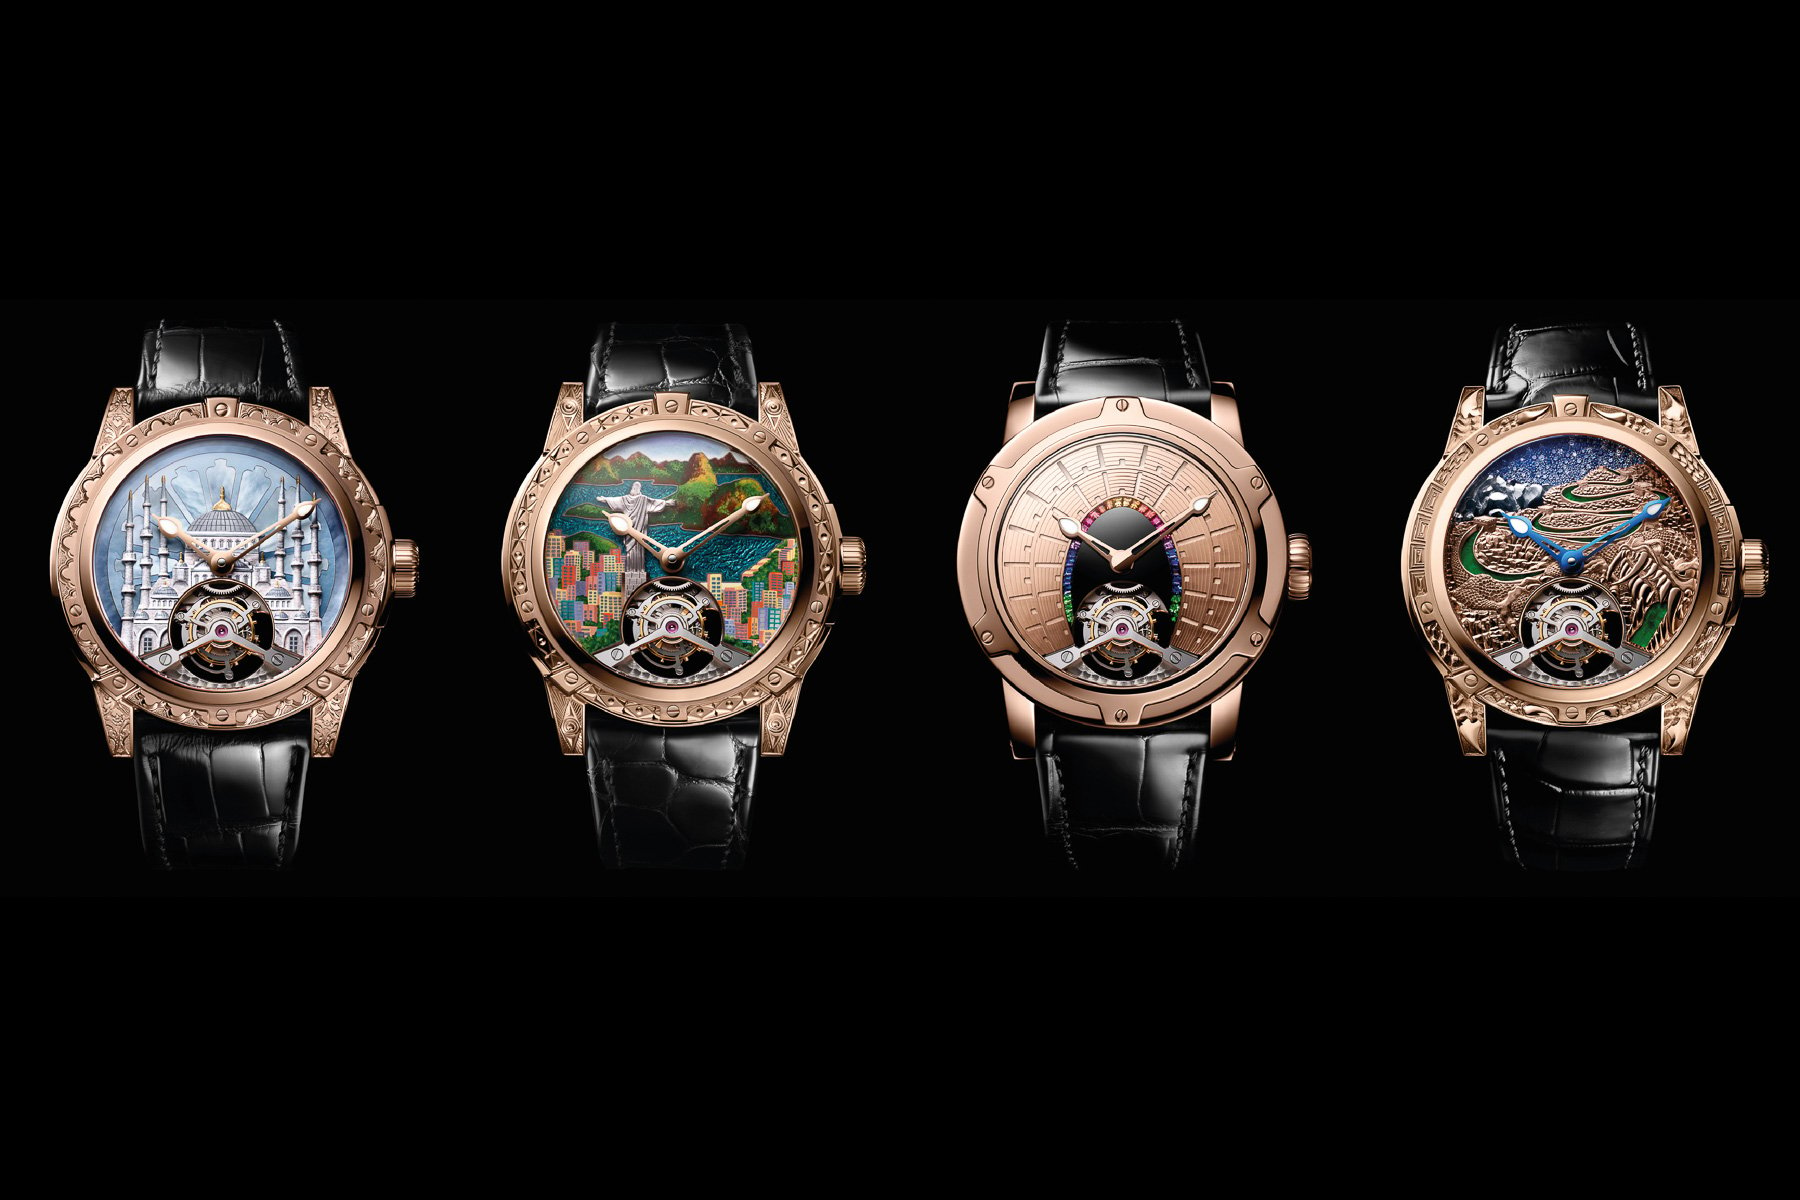 Louis Moinet gathers supplies from all over the galaxy for latest